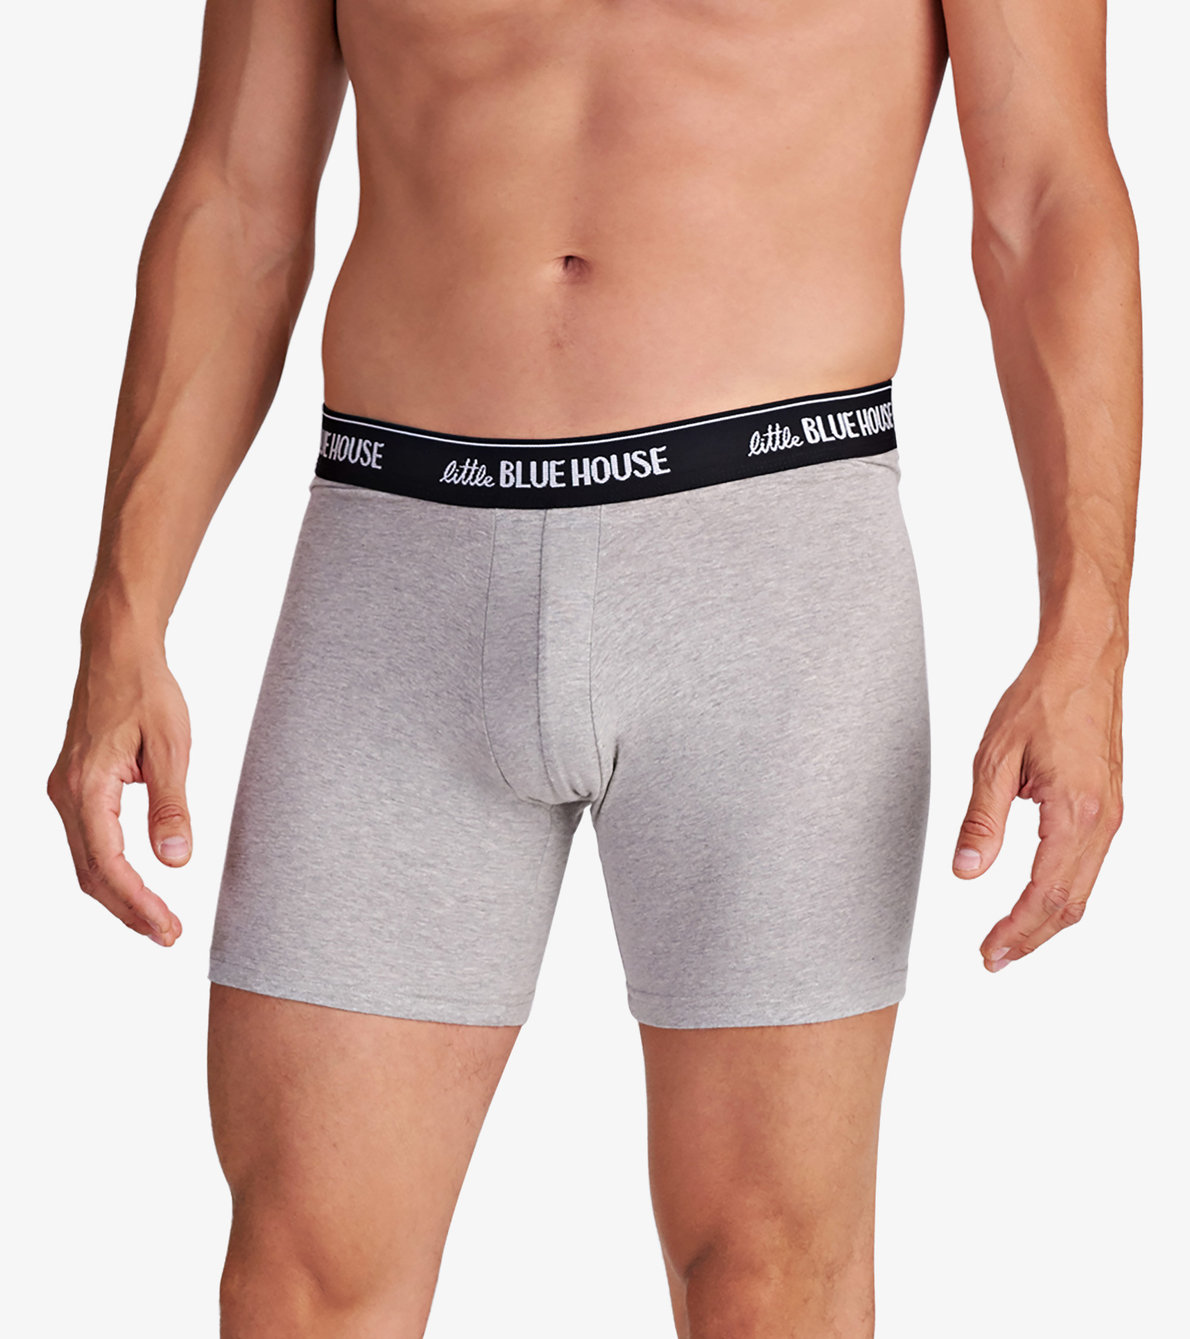 View larger image of Bear Naked Men's Boxer Briefs